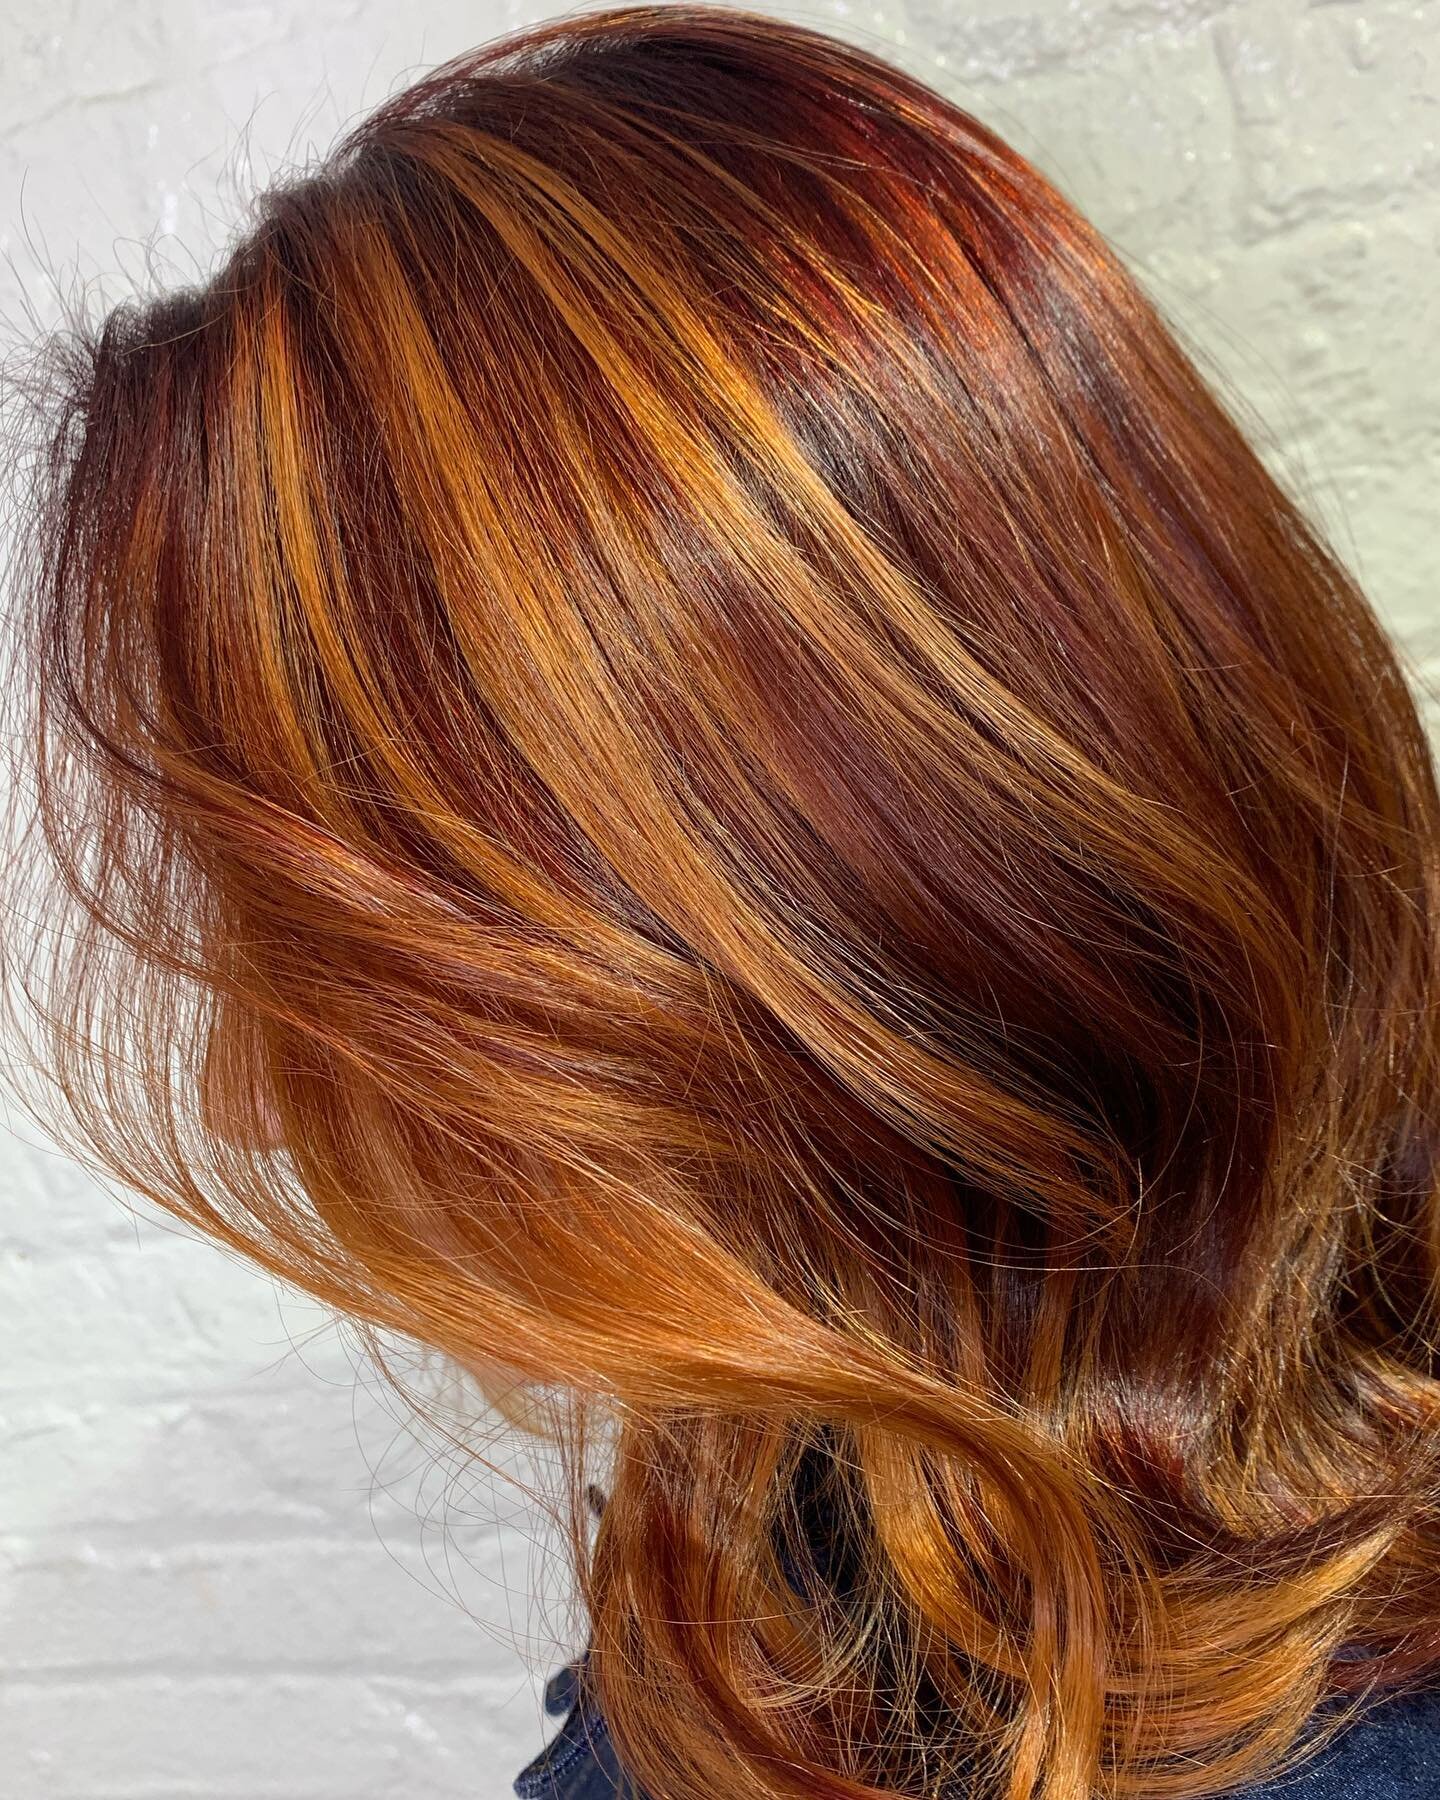 Starting to dream about Fall 🍂 Anyone else looking forward to spooky season? 🎃 We are loving these warm, rich tones. Hair by Kristina @kristina.d.beauty &bull; If you want to change your look but are unsure what you want to do, book for a complimen